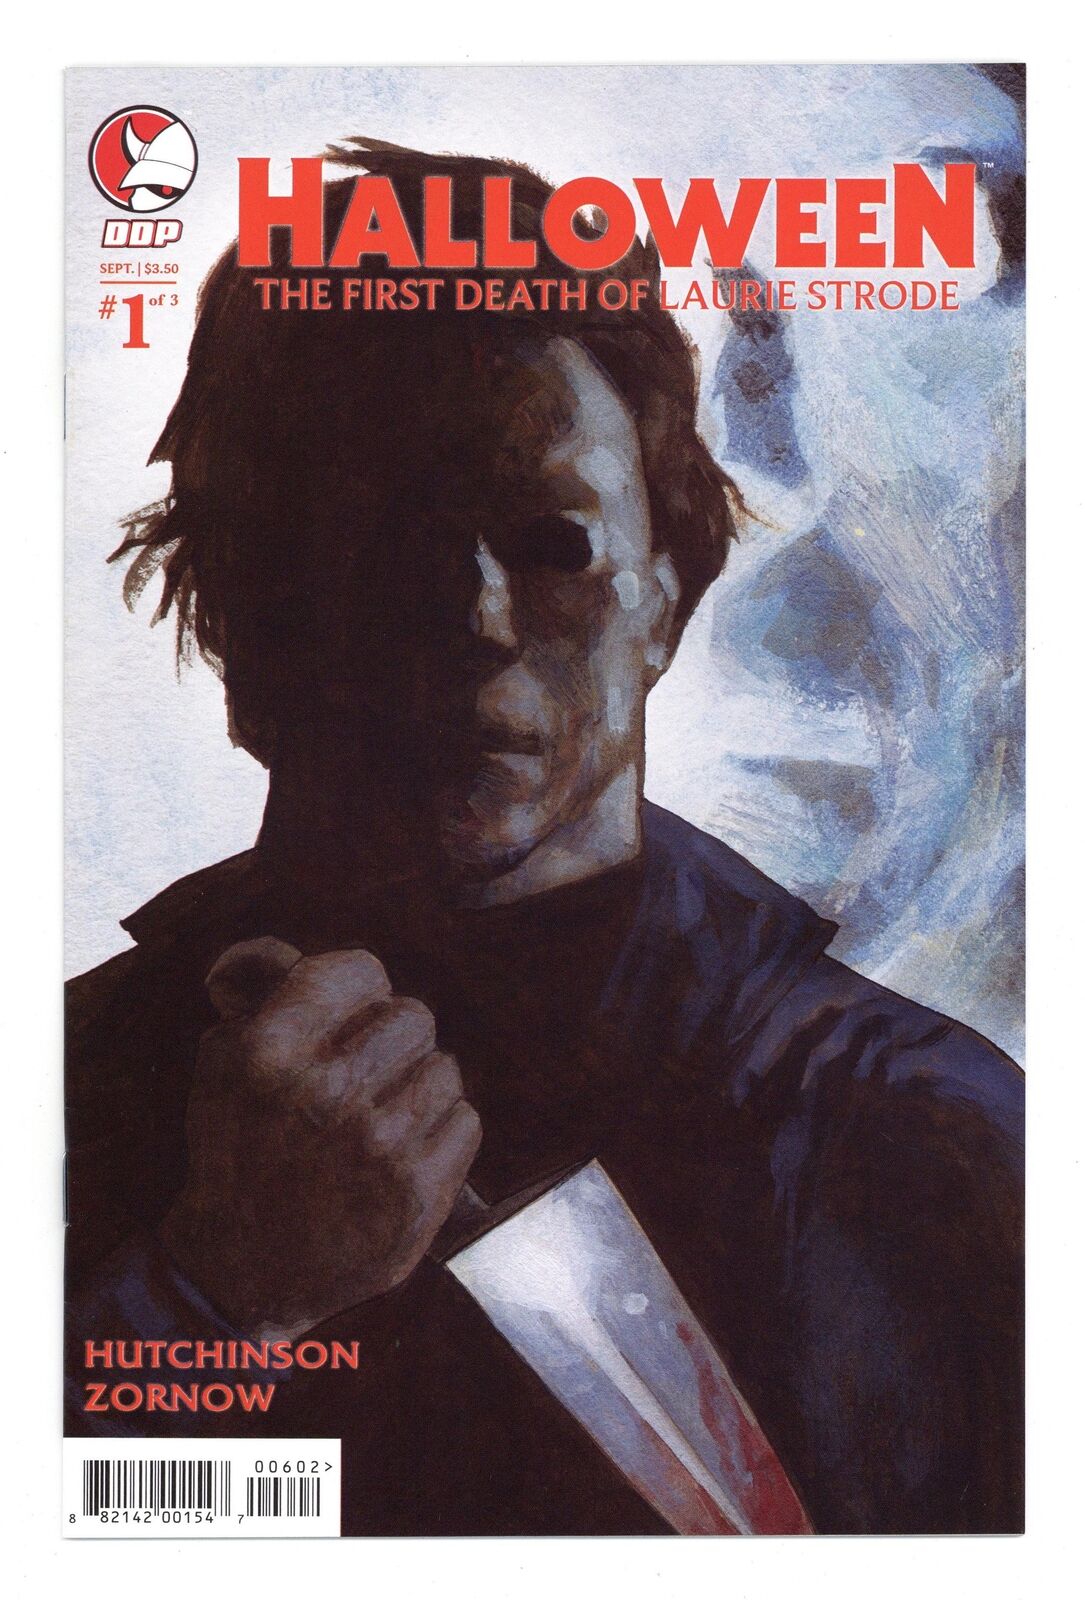 Halloween The First Death of Laurie Strode 1B VF/NM 9.0 2008